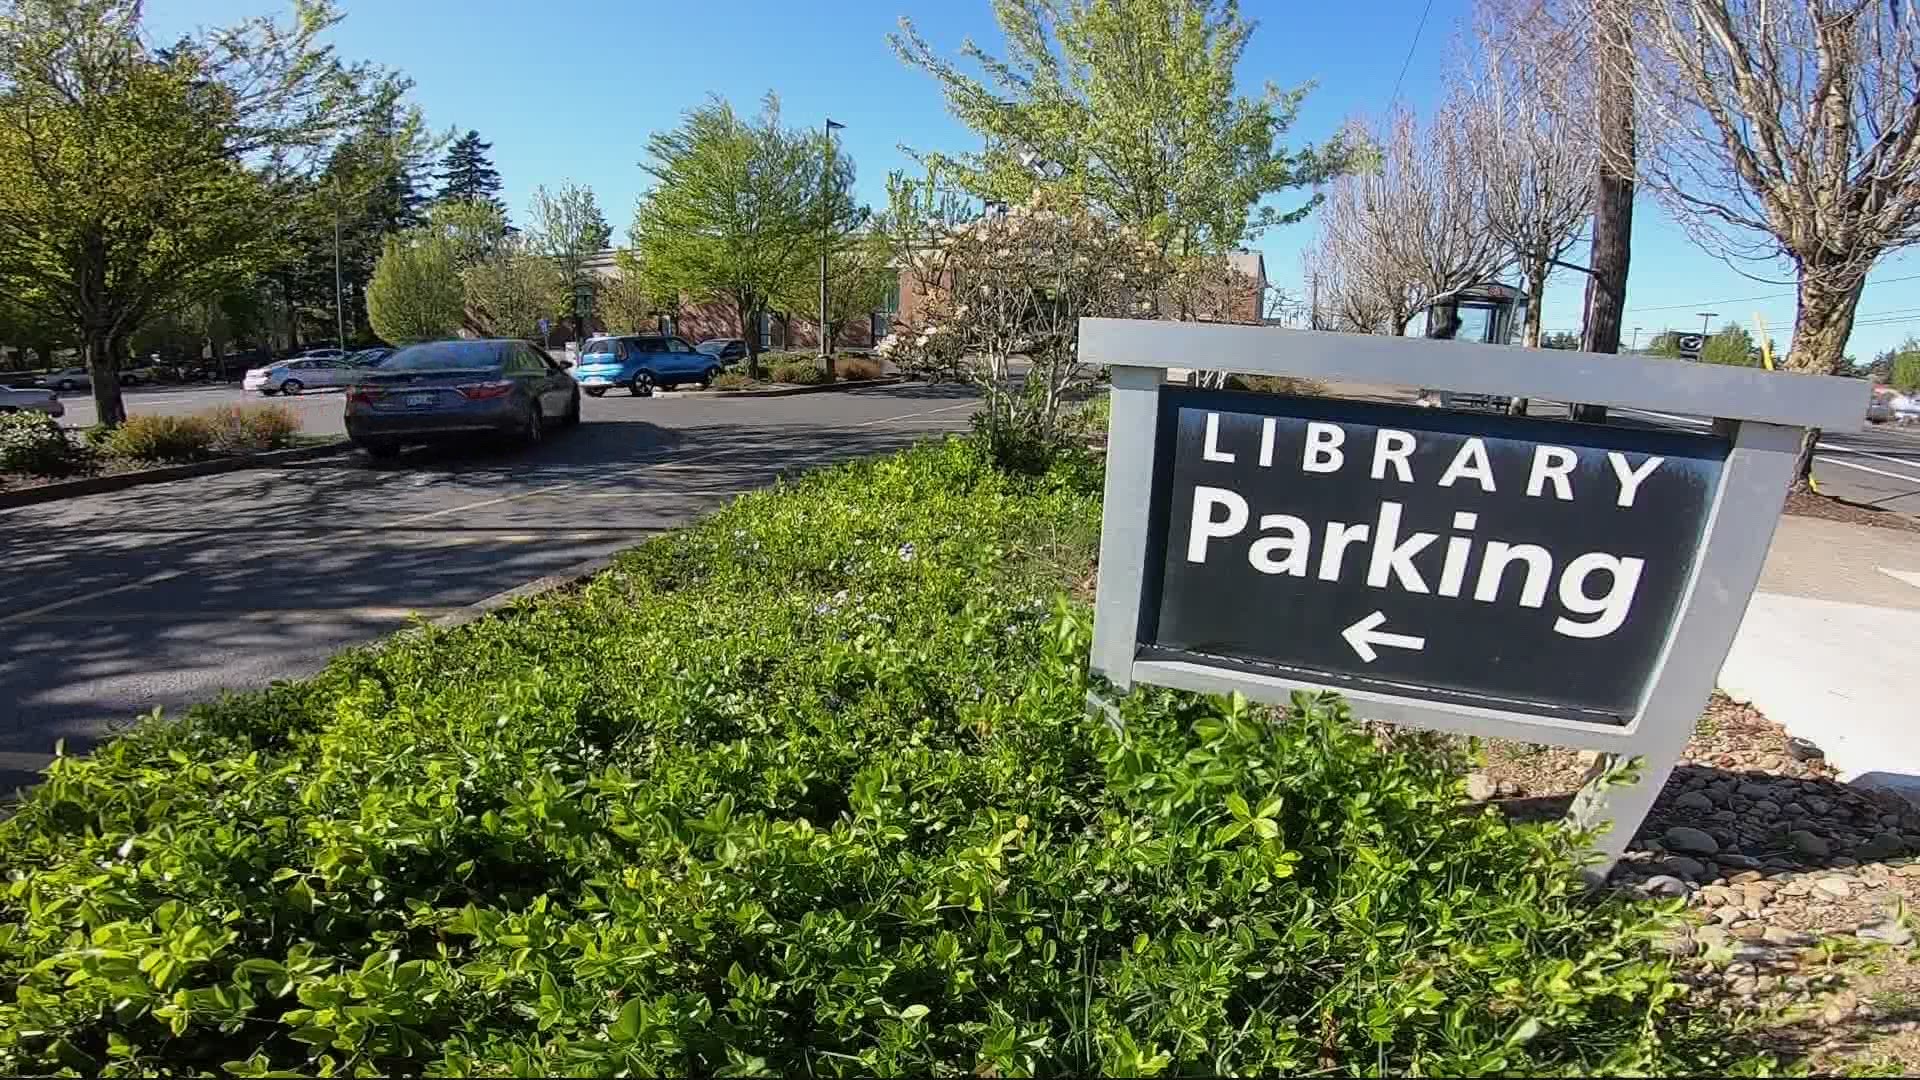 Five libraries in Multnomah County — Capitol Hill, Gresham, Holgate, Kenton and Midland — will open June 1.